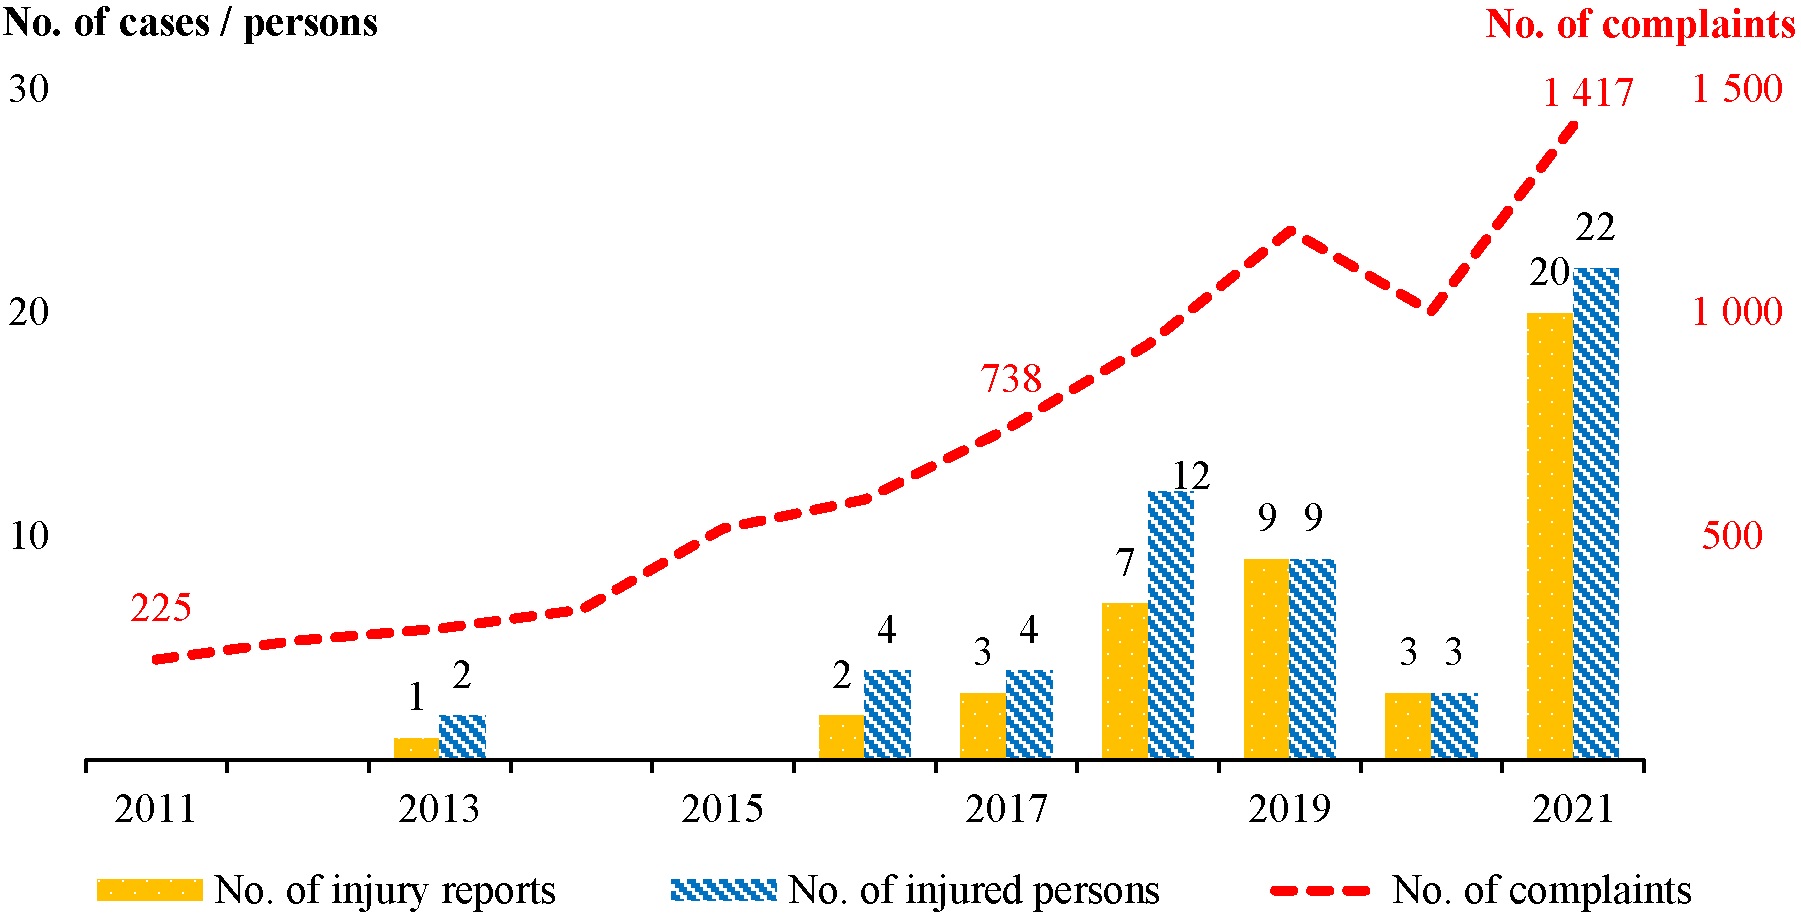 Figure 1 – Complaints and injury reports over wild pig nuisances in Hong Kong